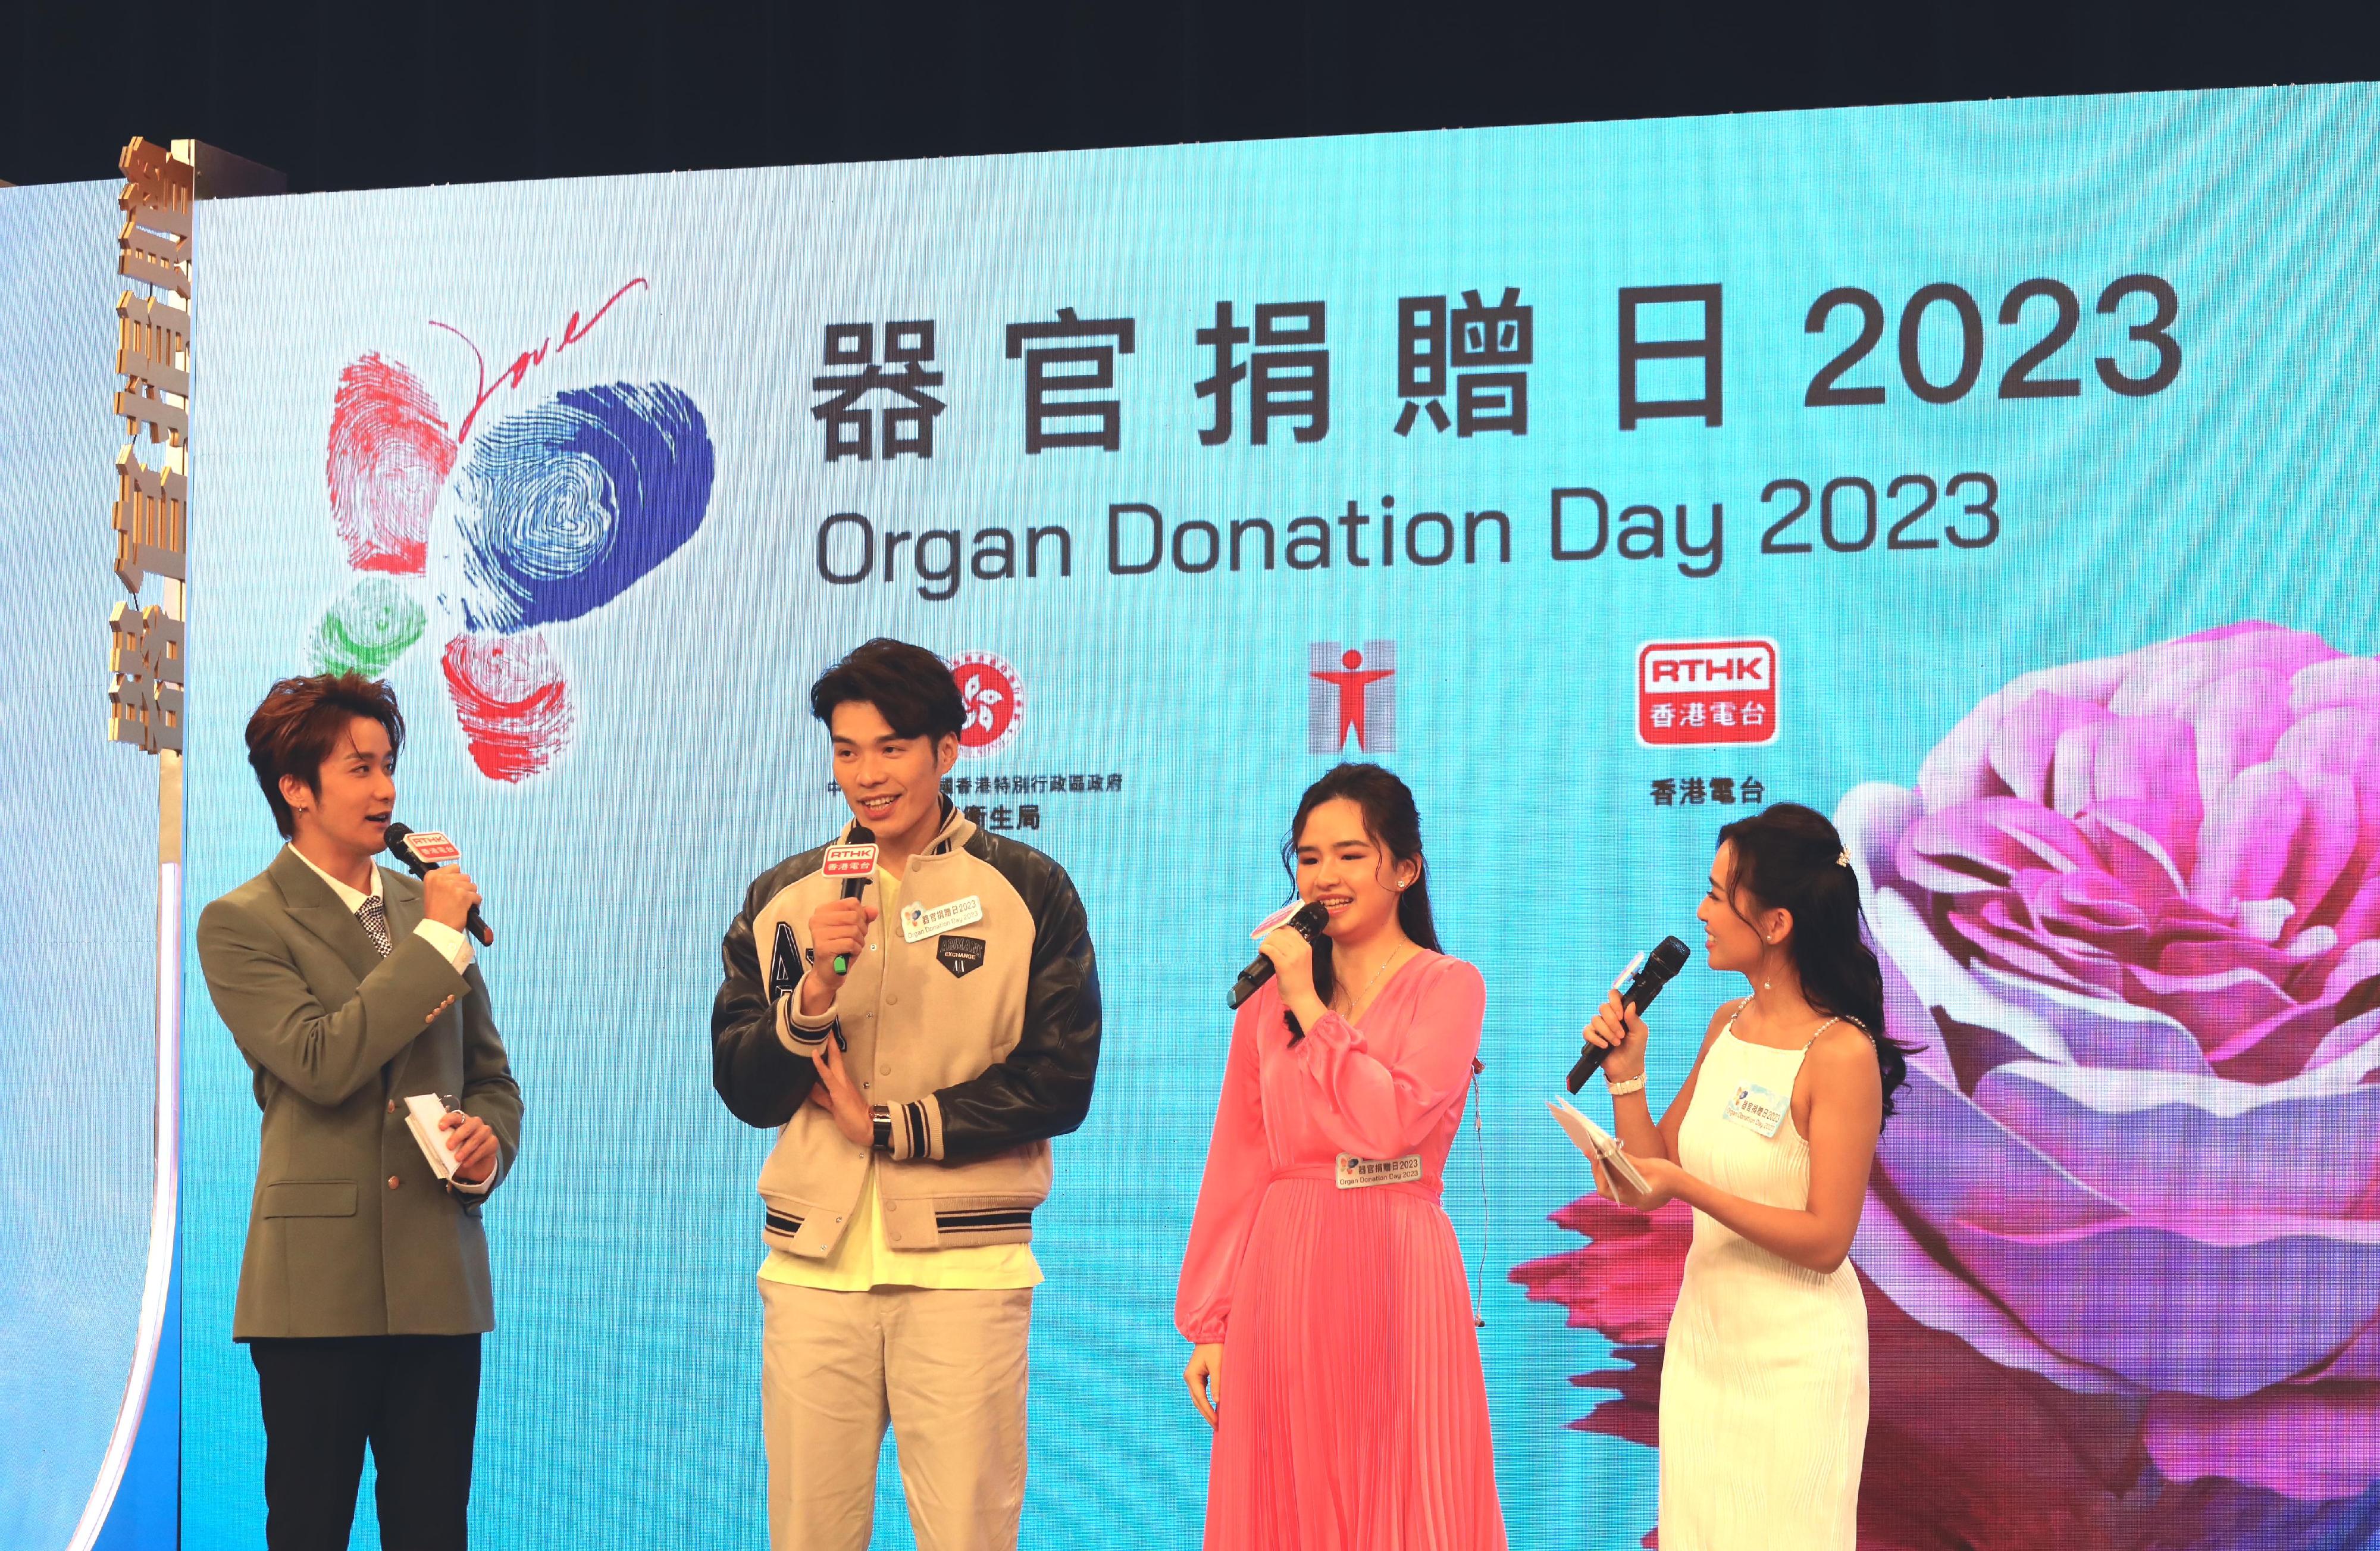 Organ Donation Day 2023 Ambassadors Ms Michelle Siu (second right) and Mr Cheung Siu-lun (second left) shared their views at the celebration of Organ Donation Day 2023 to appeal for public support for organ donation today (November 11).